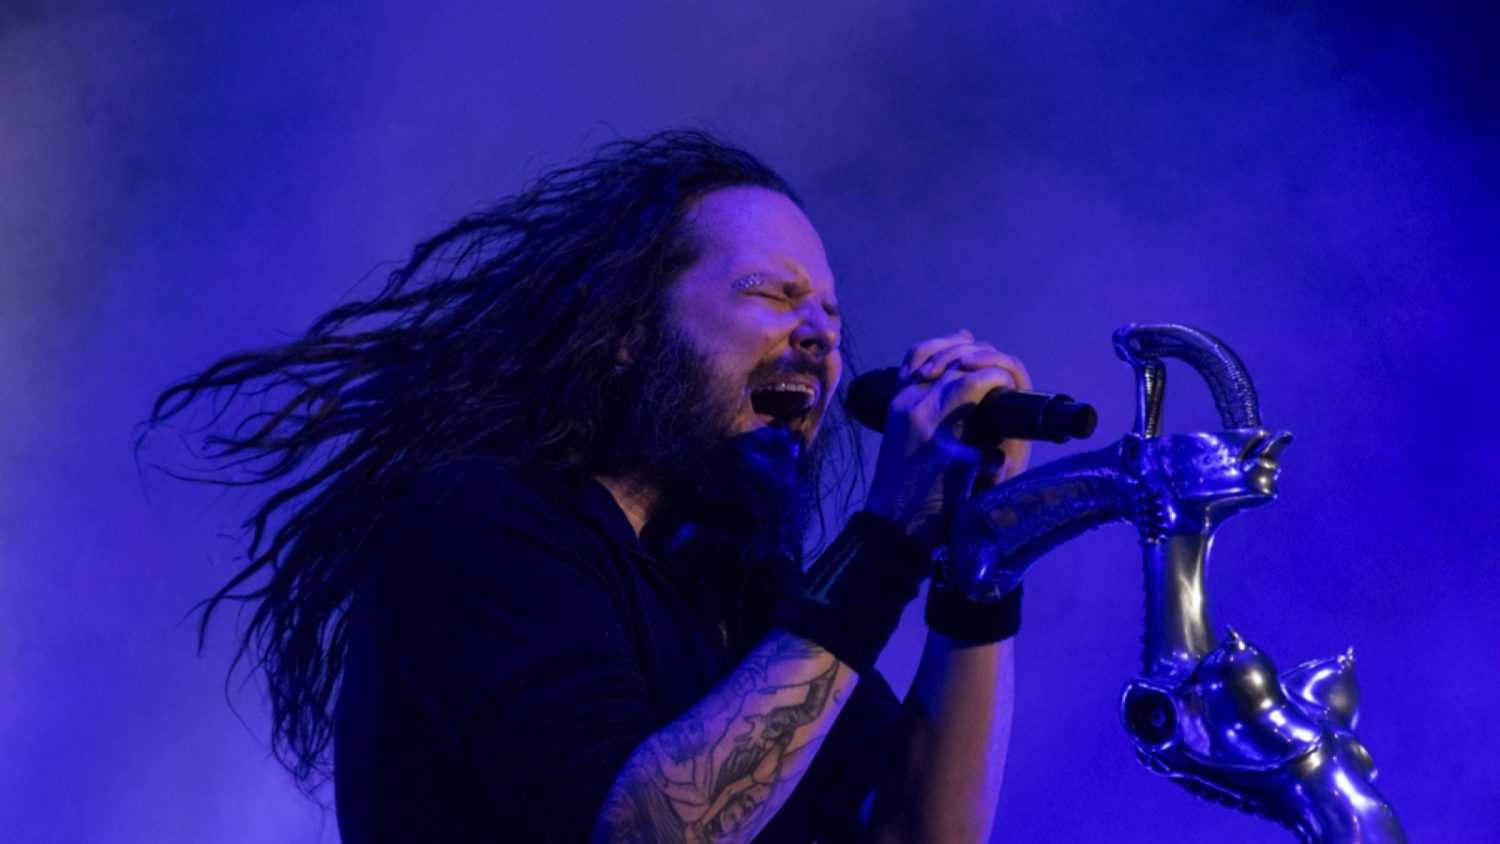 <p>One individual informs us that this intro gives them "goosebumps.' They also point out that Korn almost always opens their set with "Blind." The most infamous case of this came at the ill-fated Woodstock 99 festival.</p>